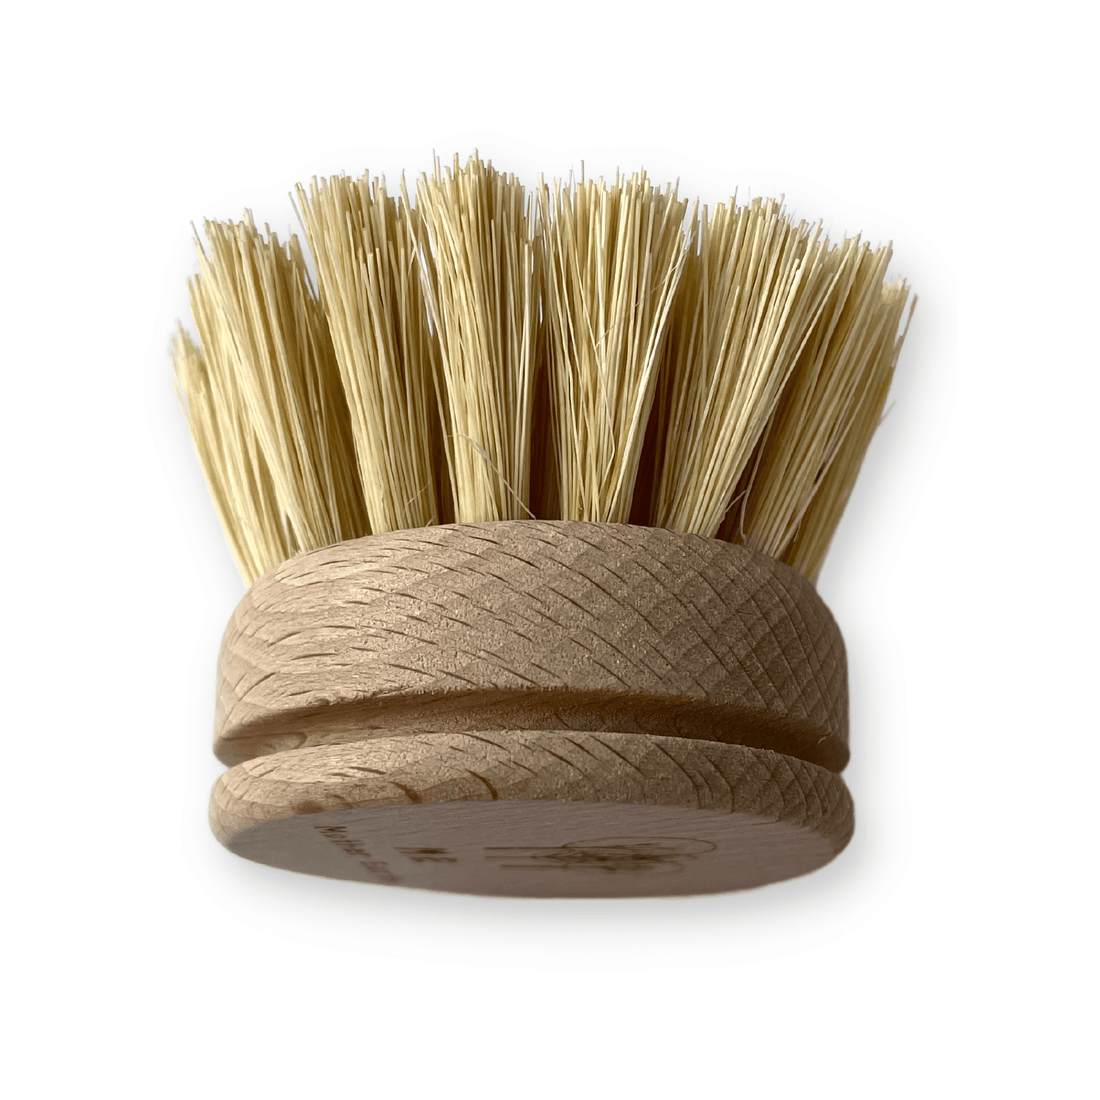 ME Mother Earth Sisal Kitchen Brush - Refill Head Only. Side View, Shown On White Background.